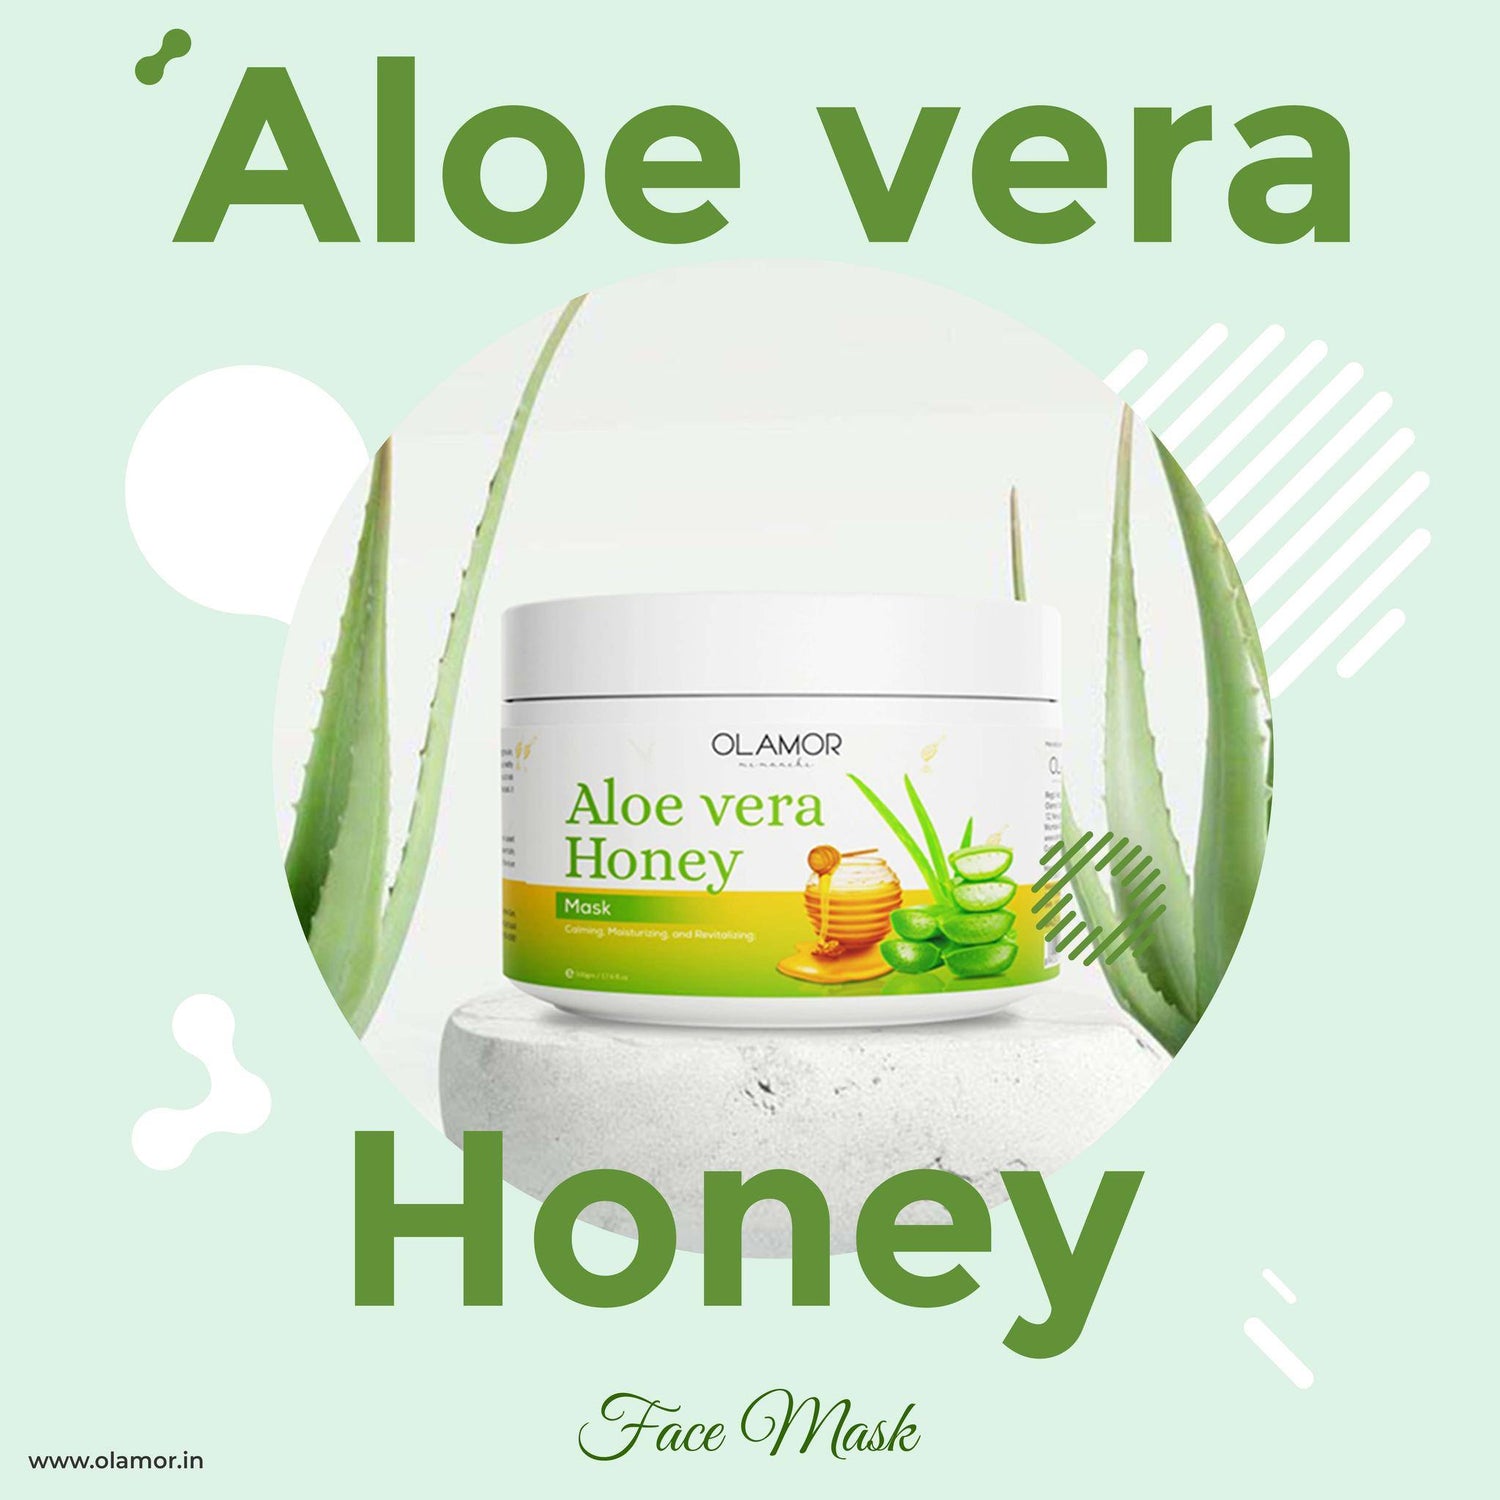 Discover the Magic of Aloe Vera with Olamor Aloe Vera Face Mask Cream 🌿✨ Transform your skincare routine with the soothing power of nature